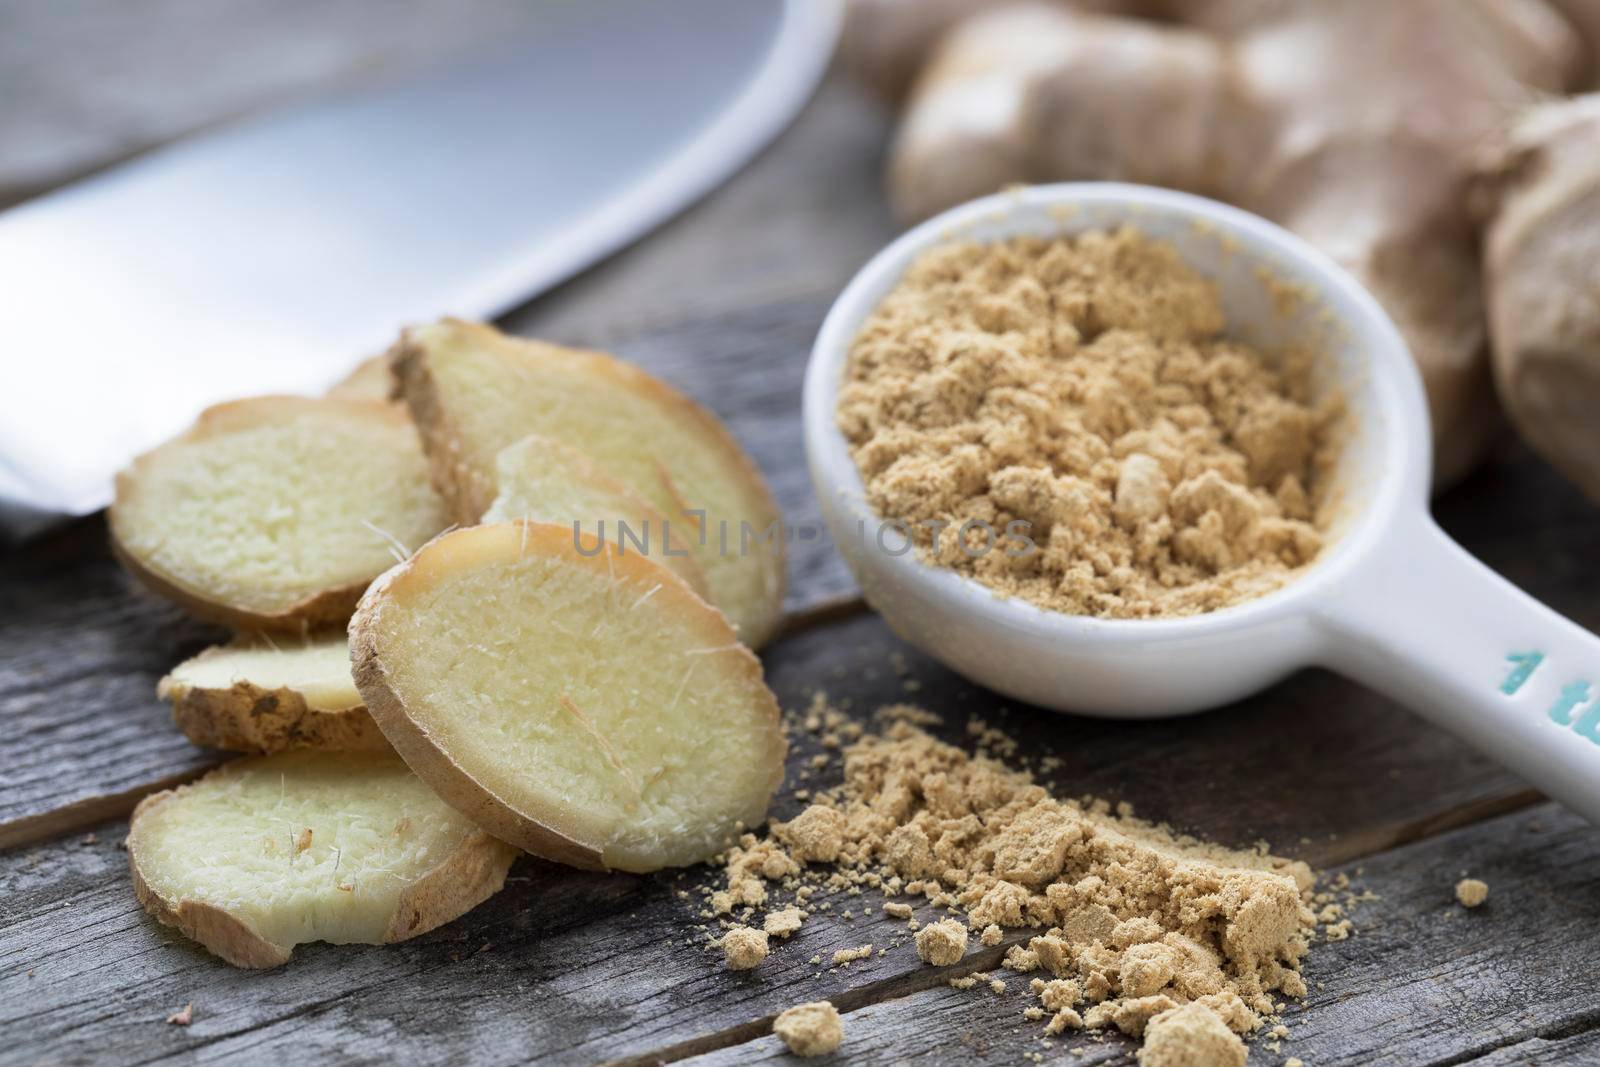 Ginger root, slices, and powder with knife in background.